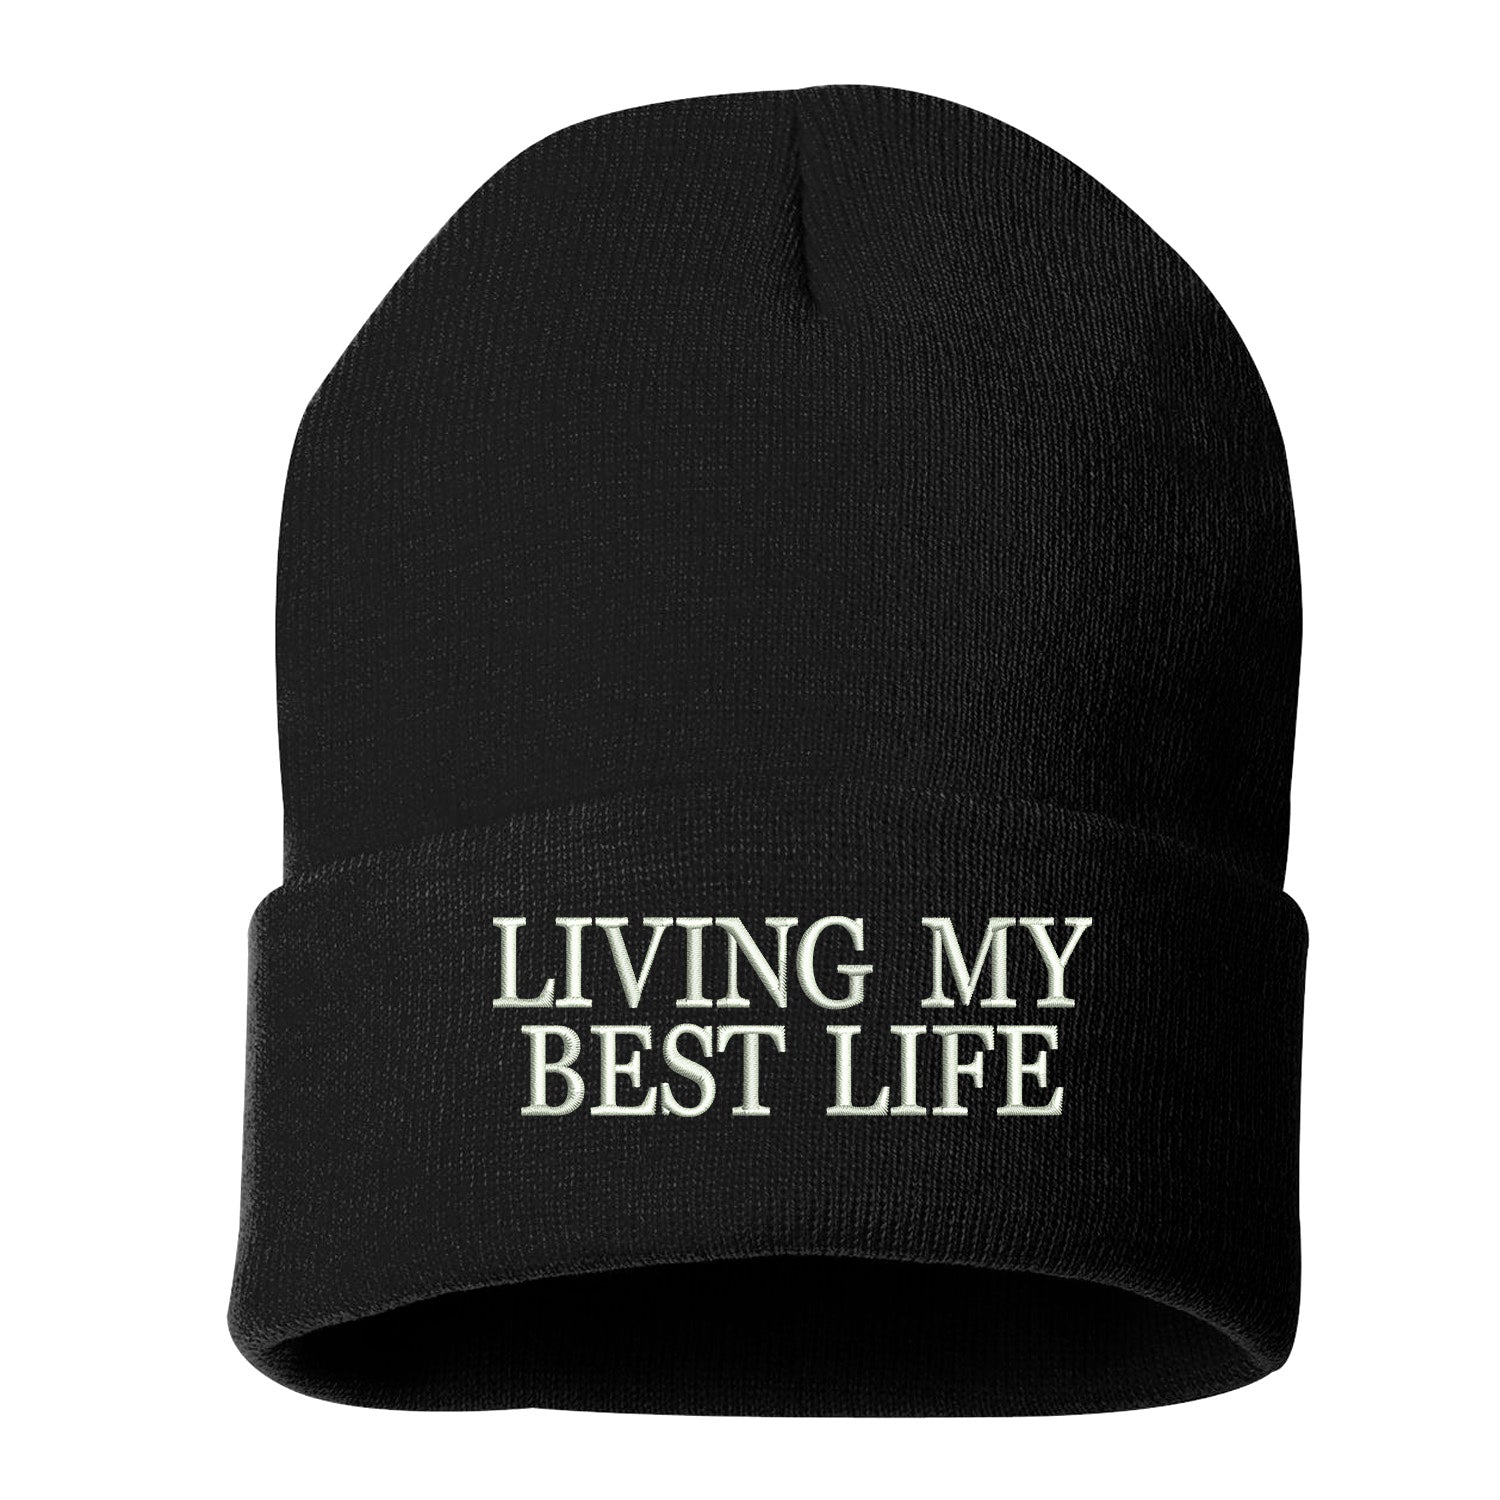 Living My Best Life Cuffed Beanie - Prfcto Lifestyle